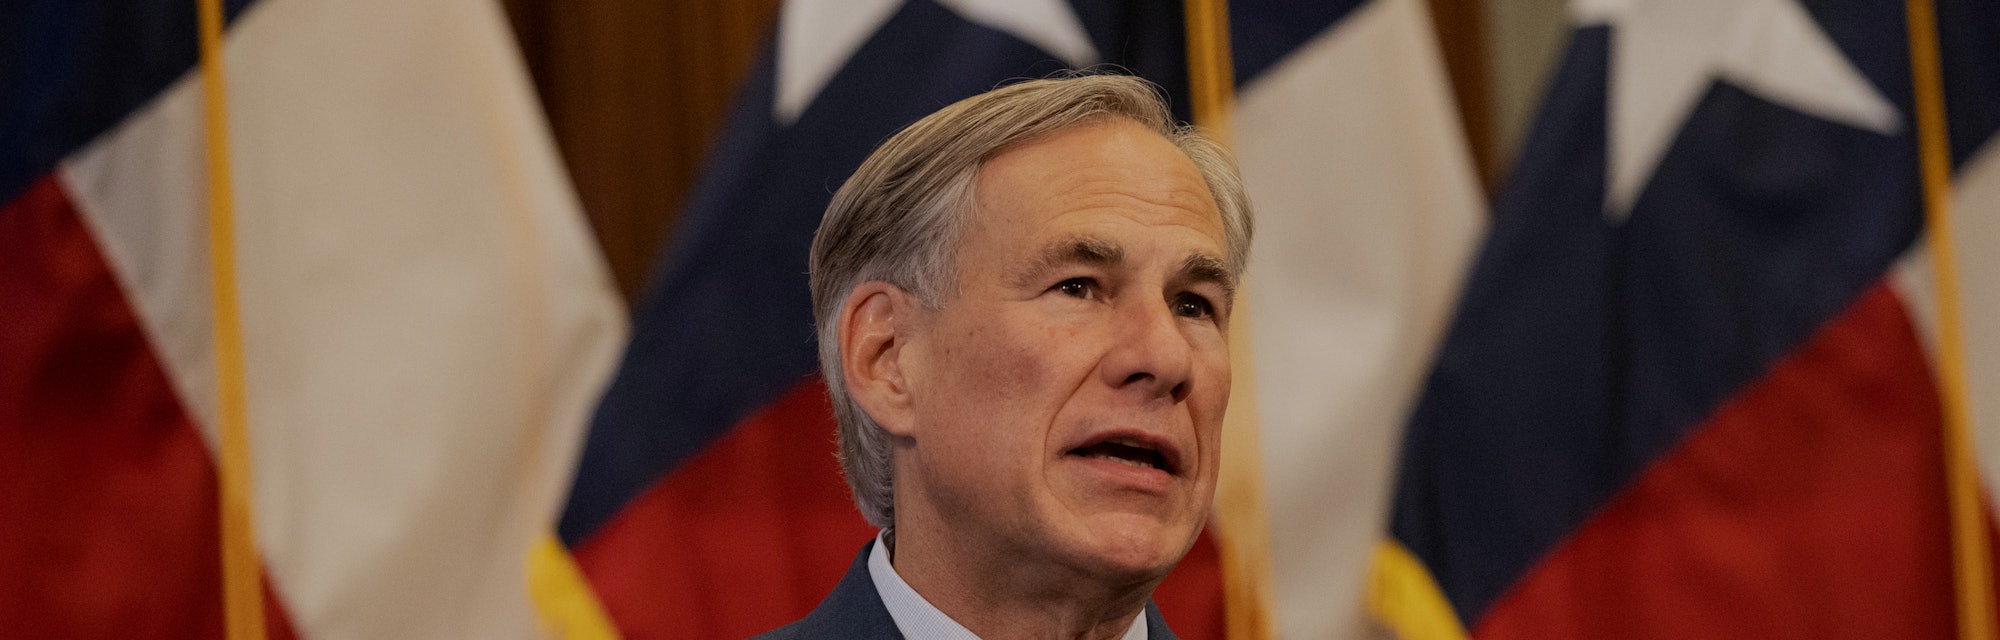 Texas Governor Greg Abbott announces the reopening of more Texas businesses during the COVID-19 pand...